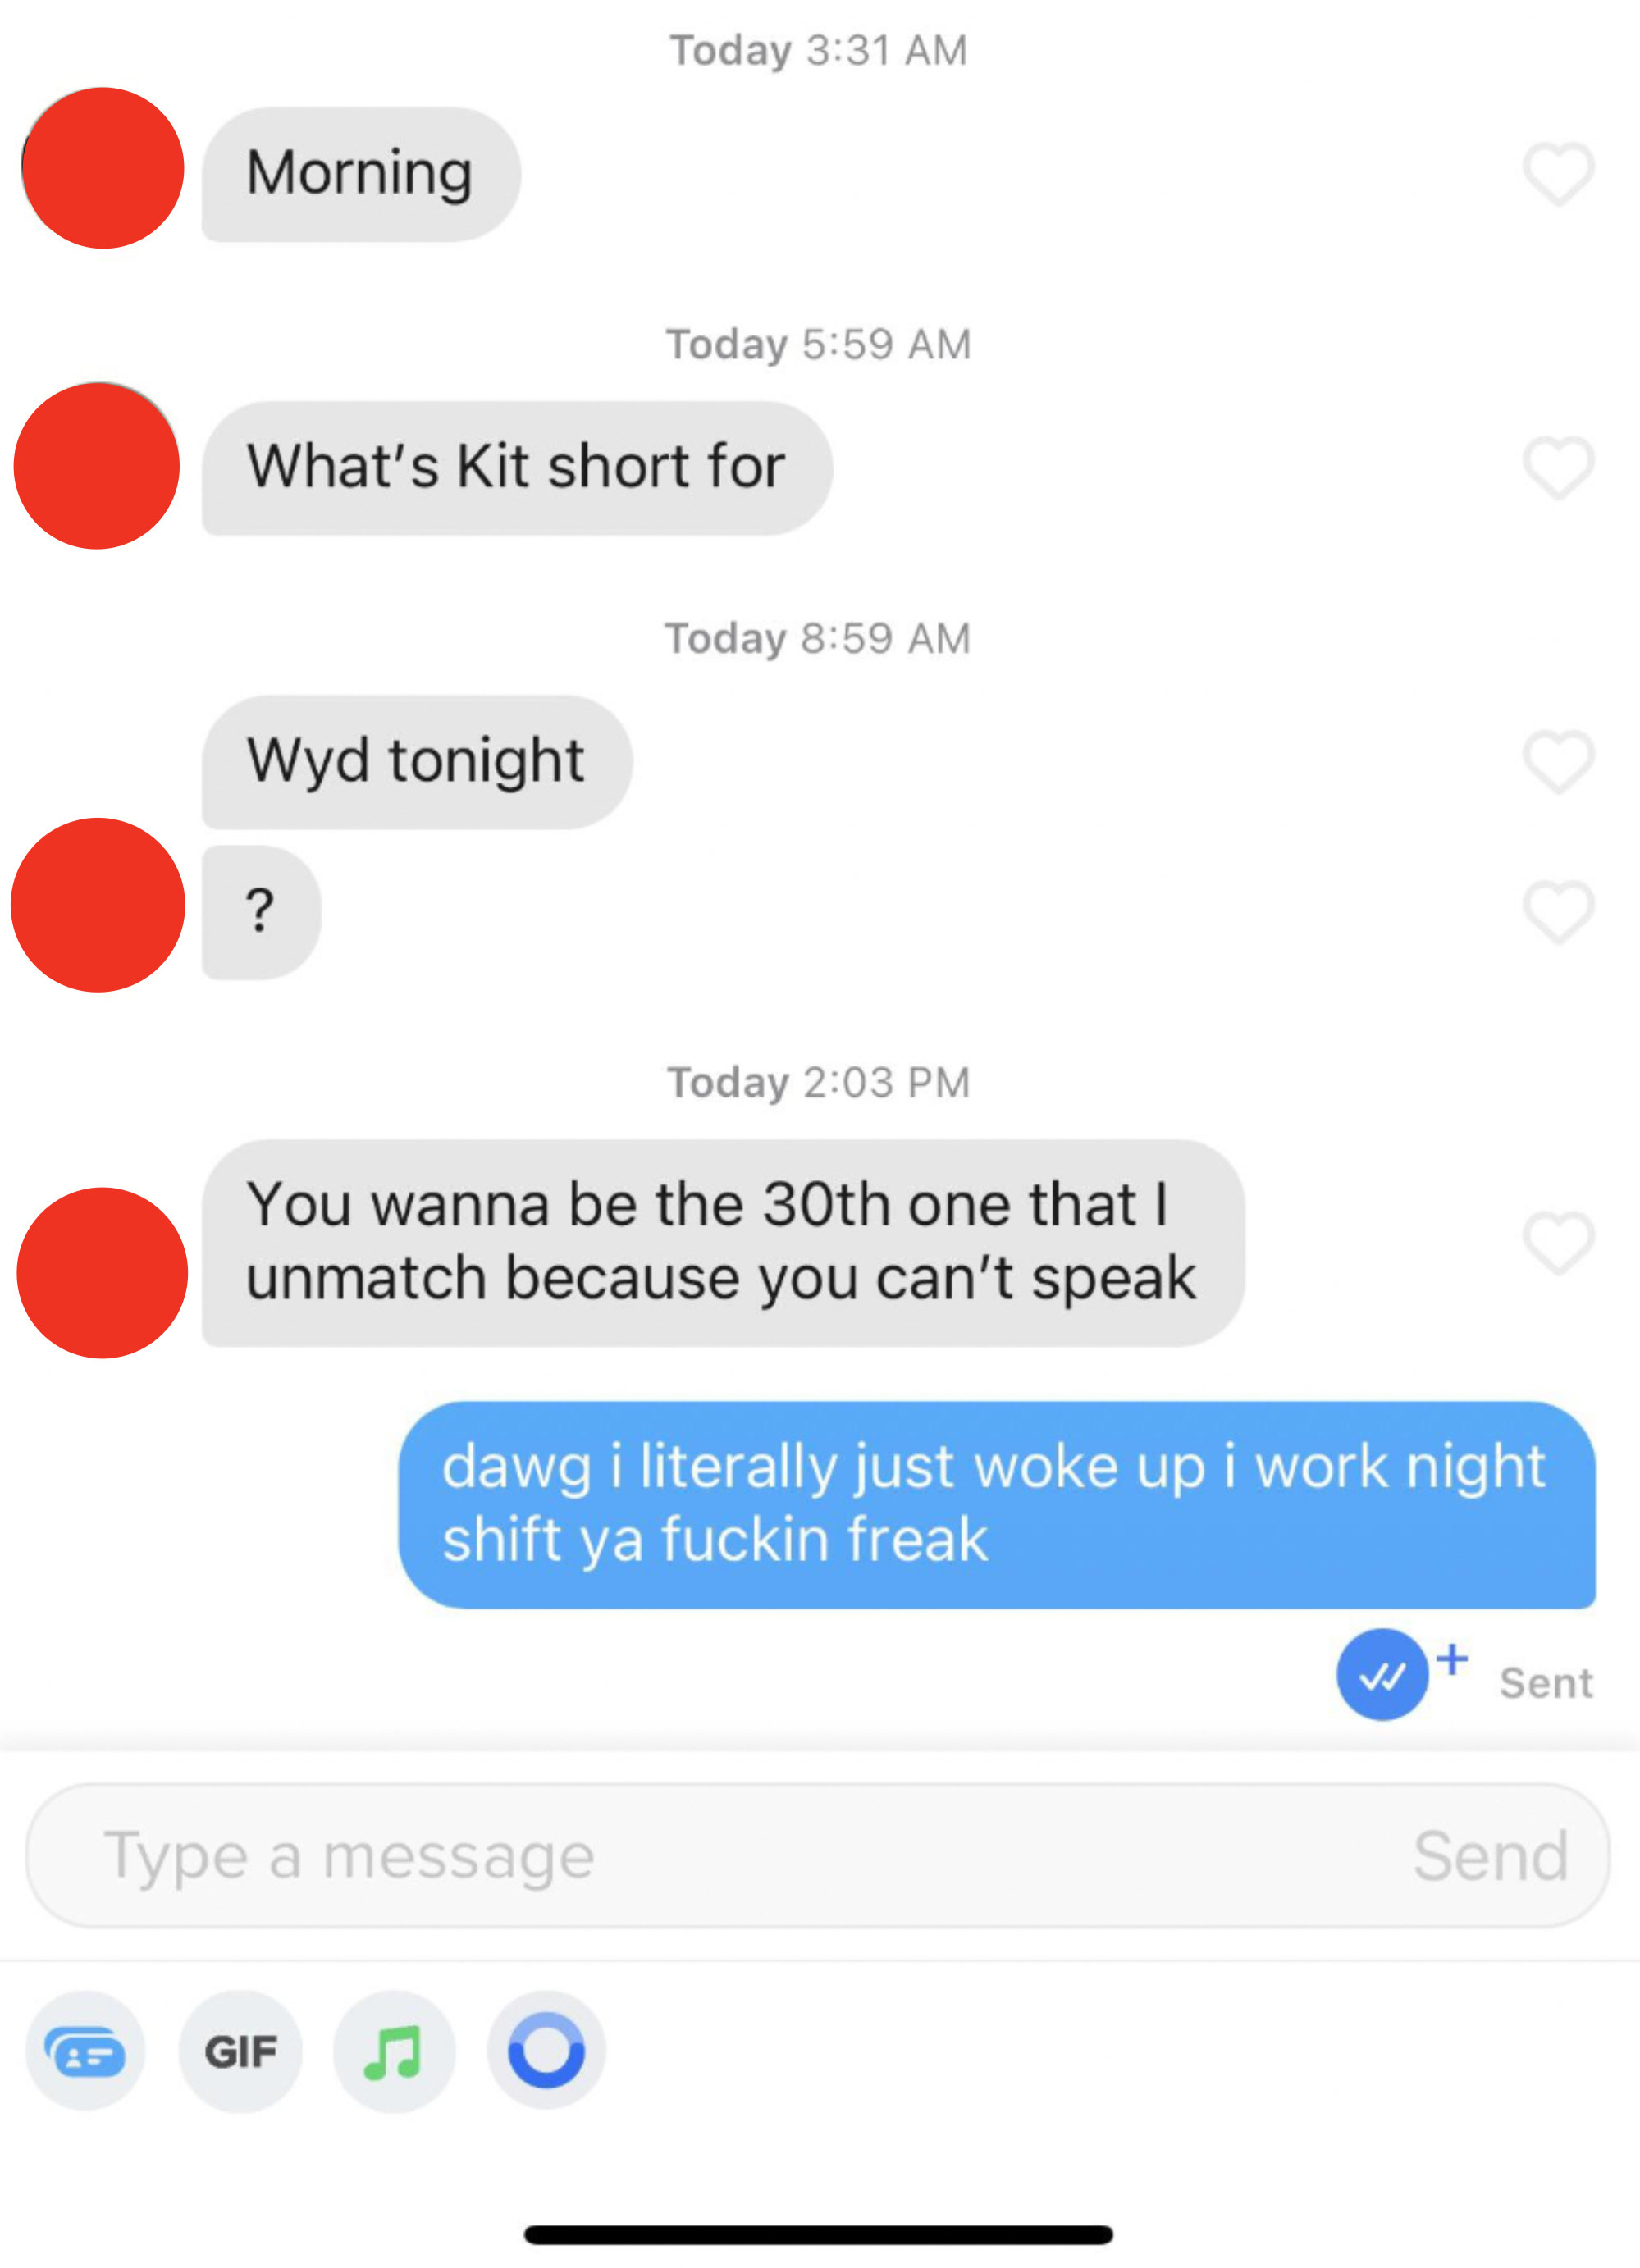 &quot;You wanna be the 30th one that I unmatch because you can&#x27;t speak&quot;